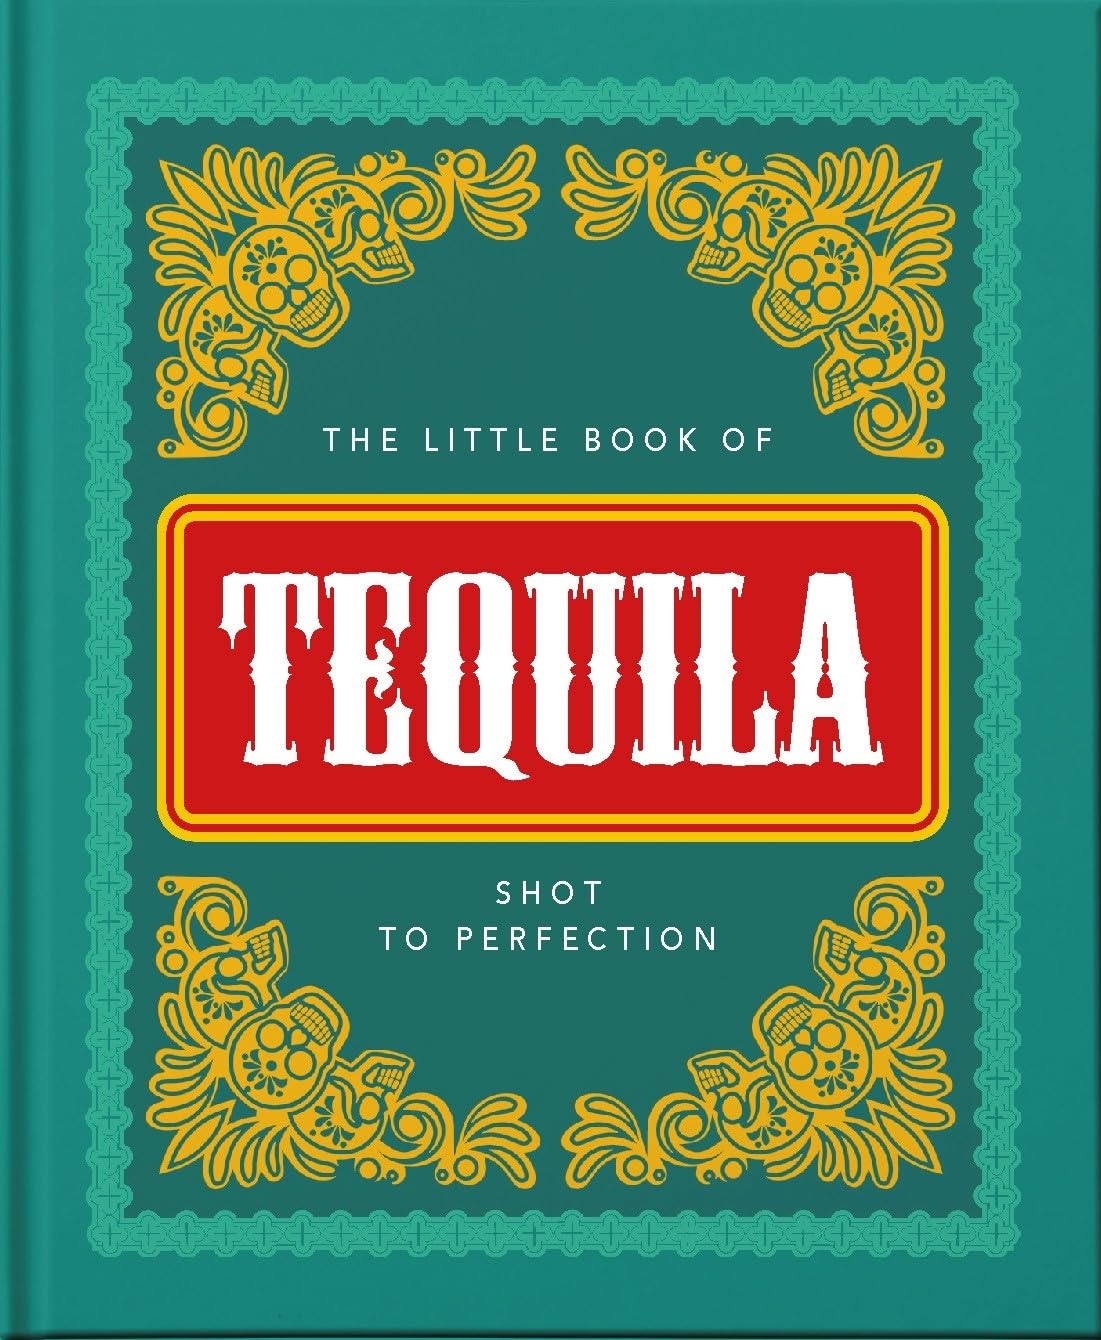 THE LITTLE BOOK OF TEQUILA SHOT TO PERFECTION